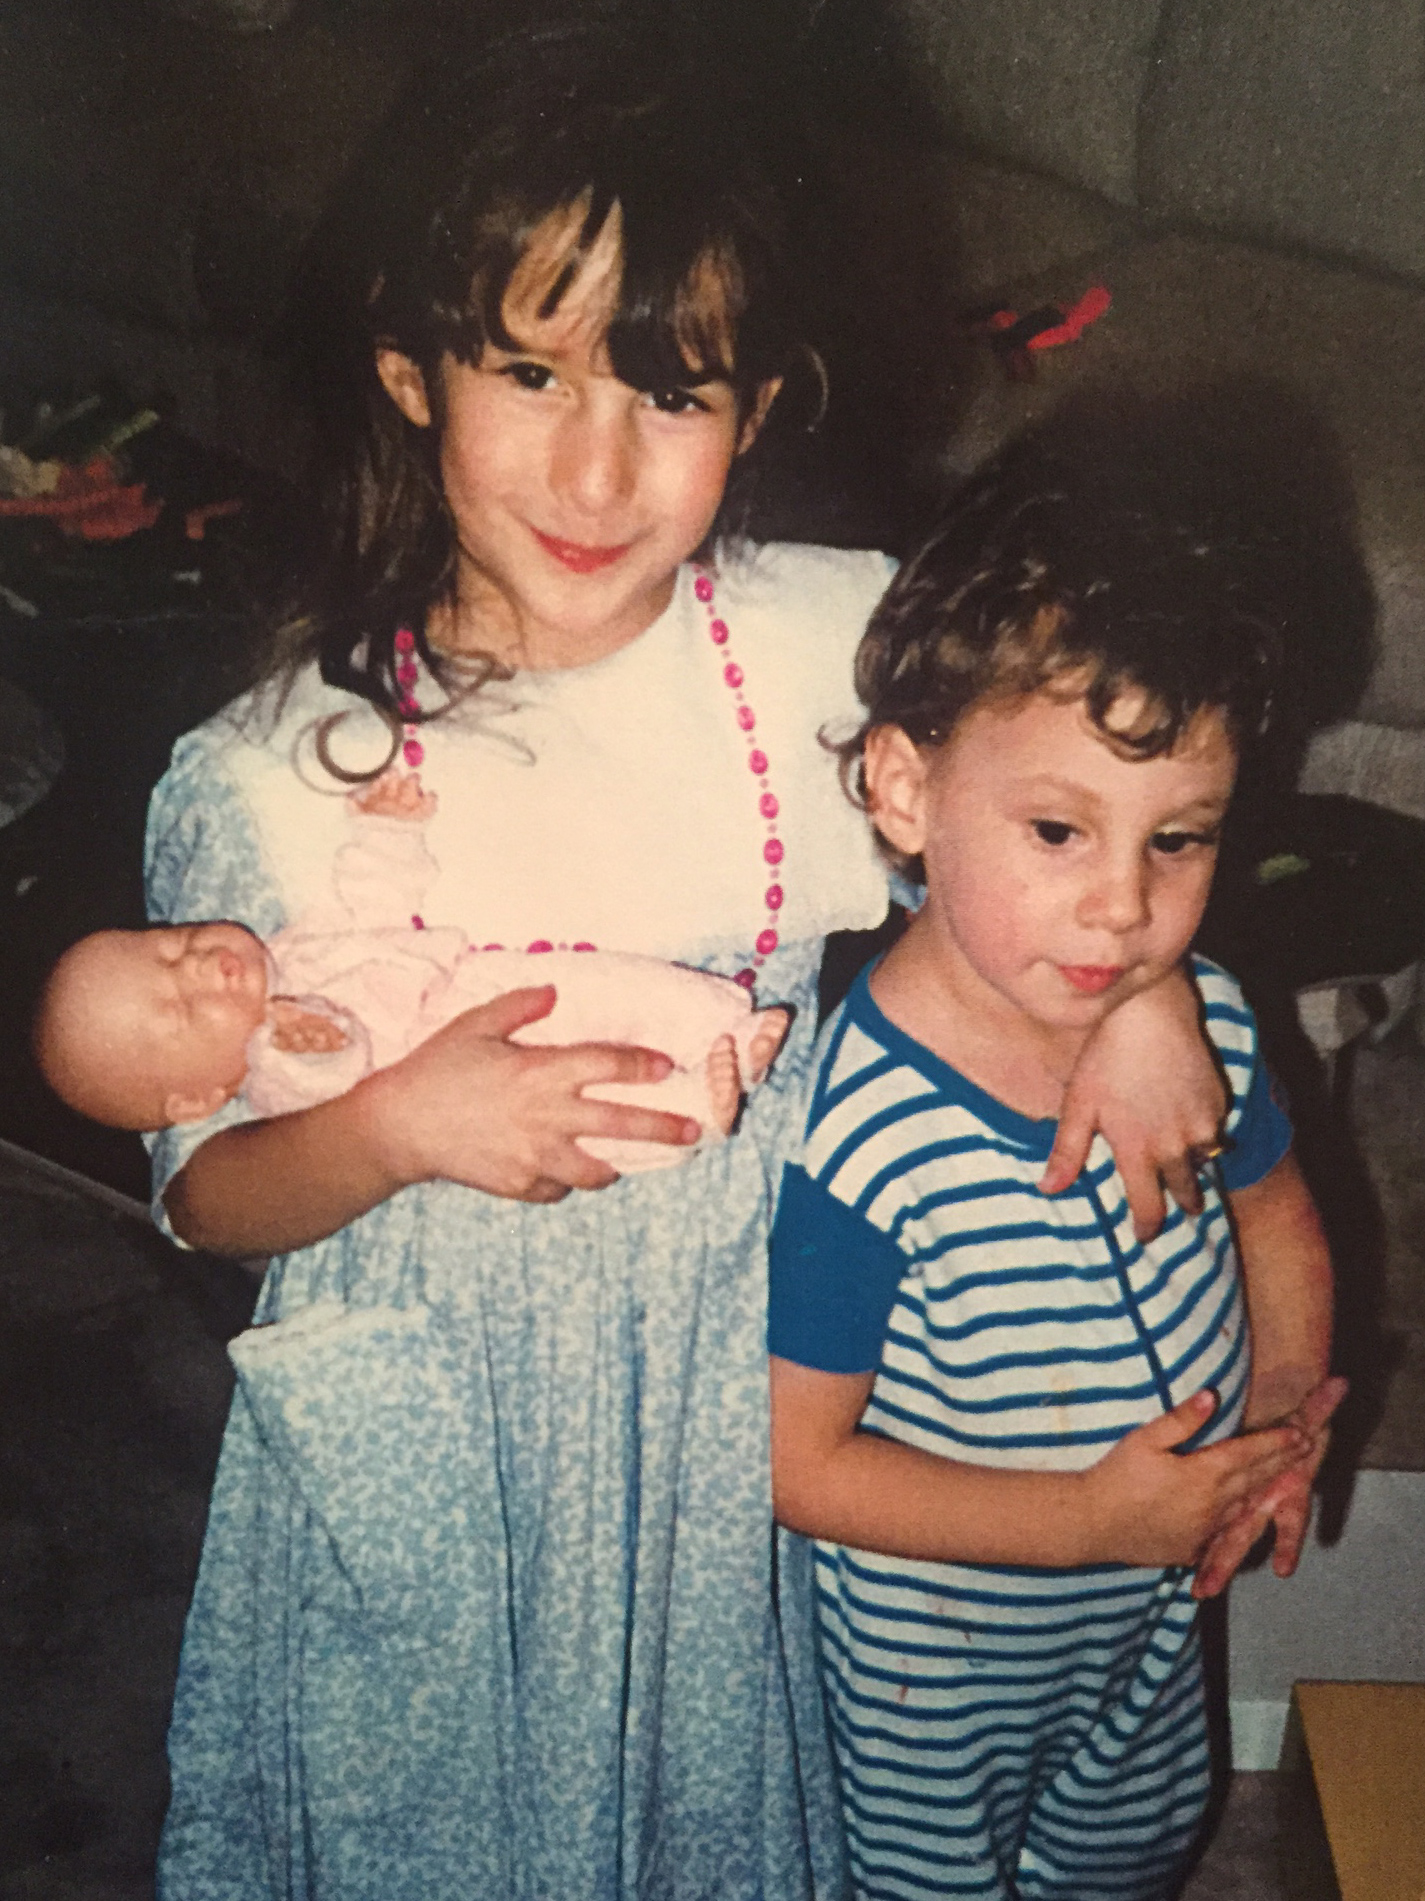 The Antonoff siblings were allowed to skip school whenever they wanted while growing up in suburban NJ.